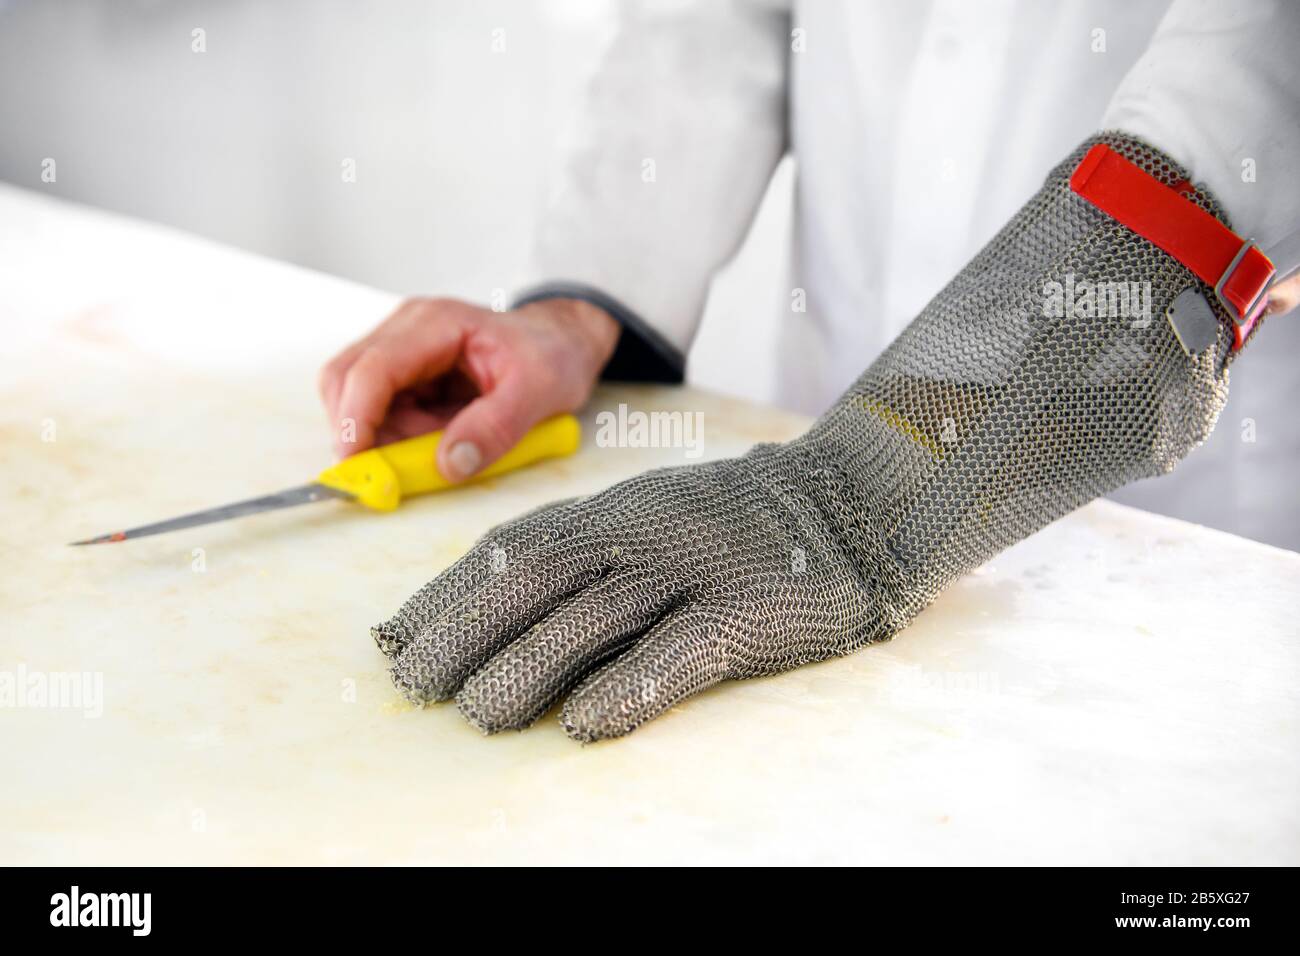 A Break Down of Butcher Gloves and Food Slicing Safety